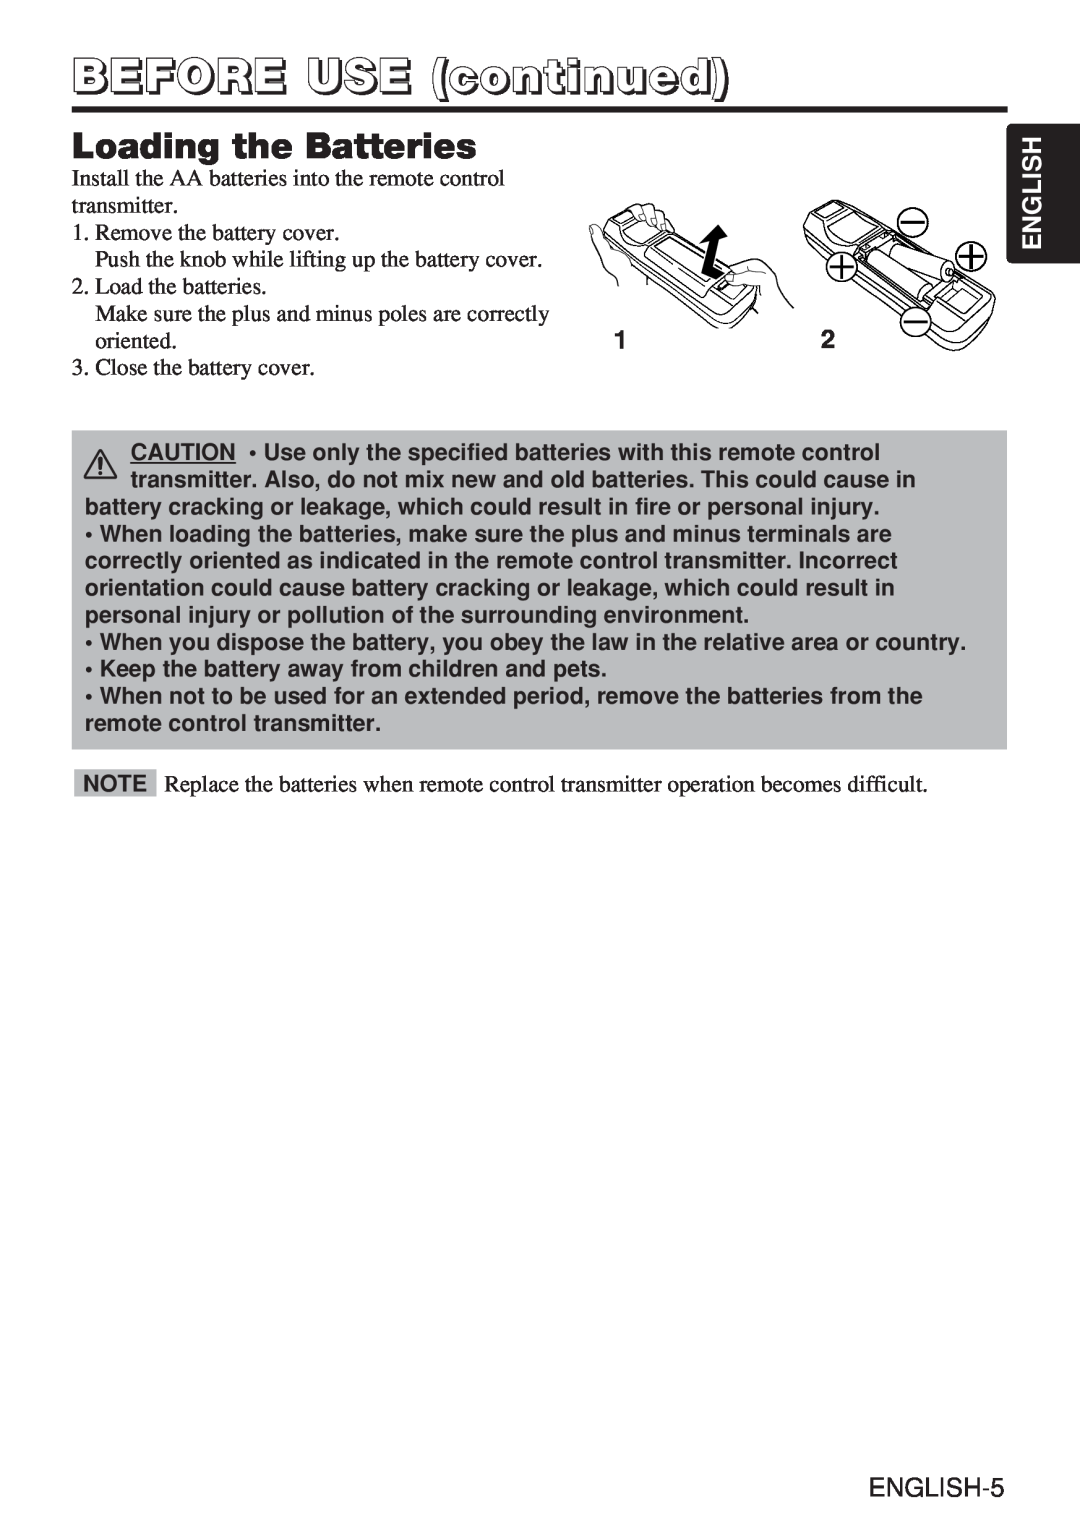 Hitachi CP-X980W user manual Loading the Batteries, BEFORE USE continued, English, ENGLISH-5 